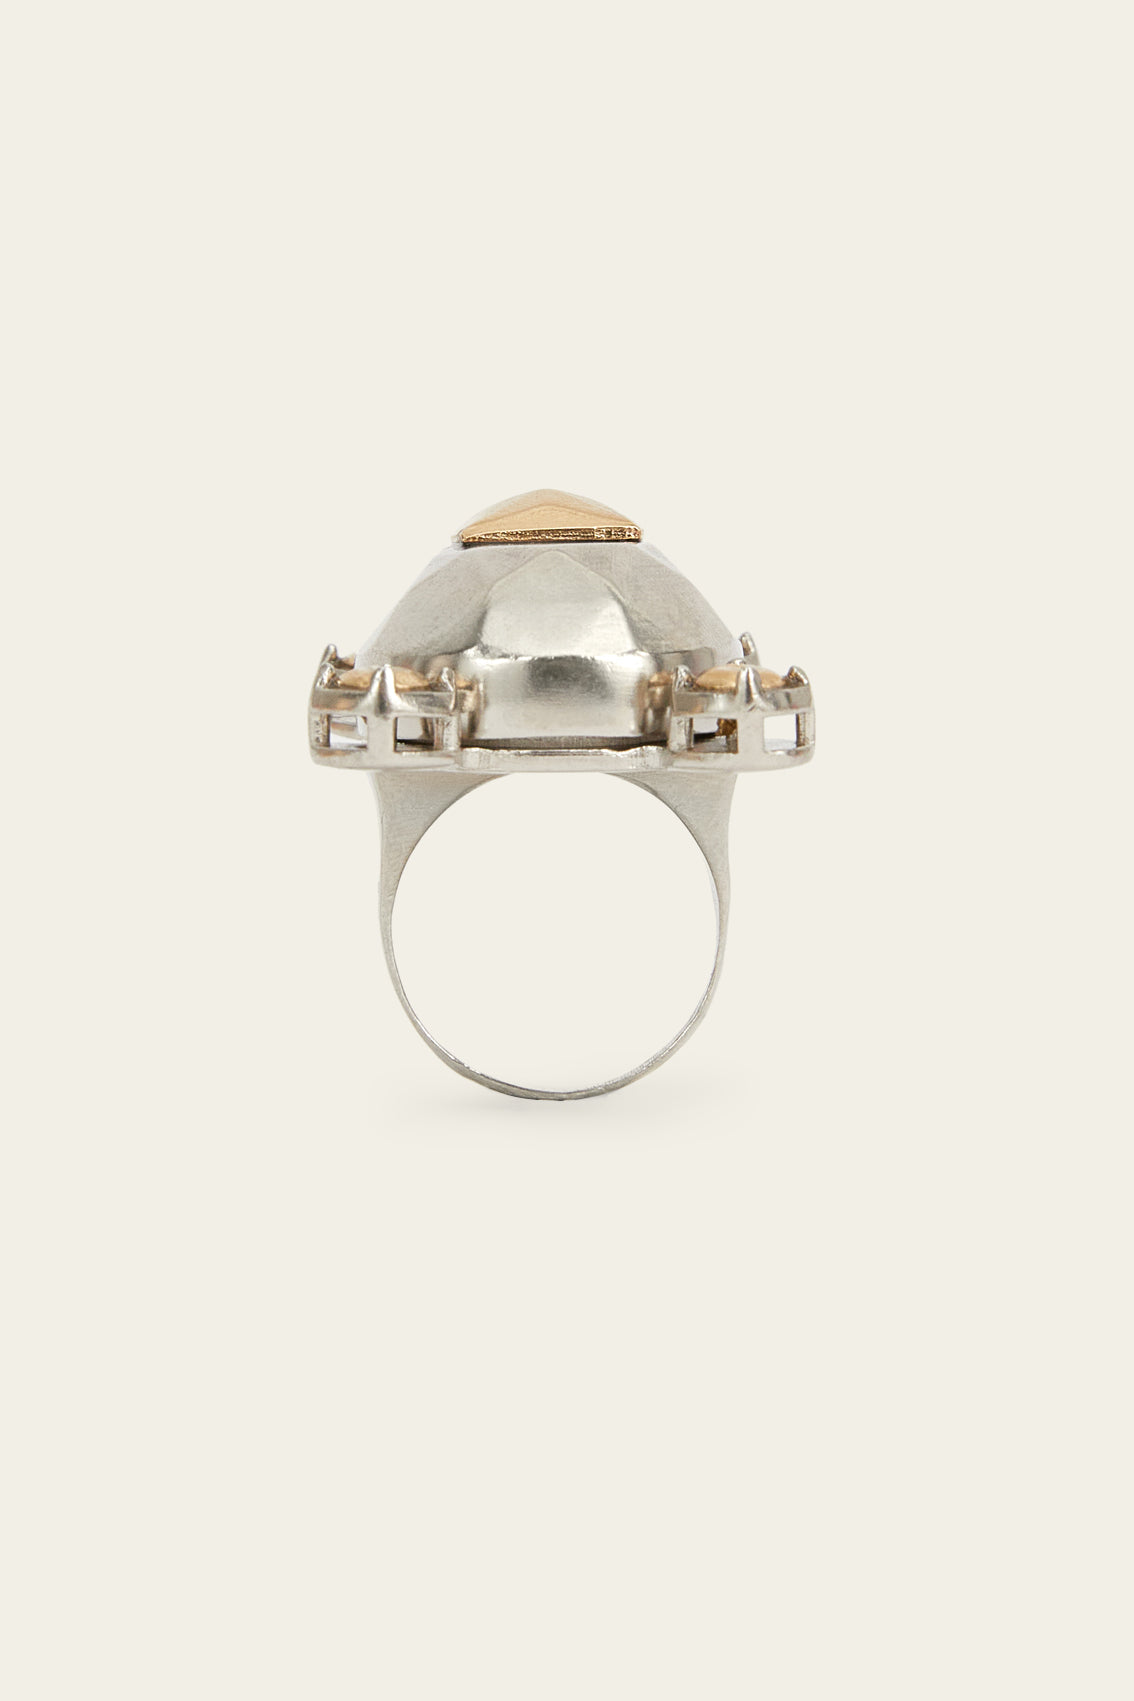 Maxi Metal Stud Ring with Prongs